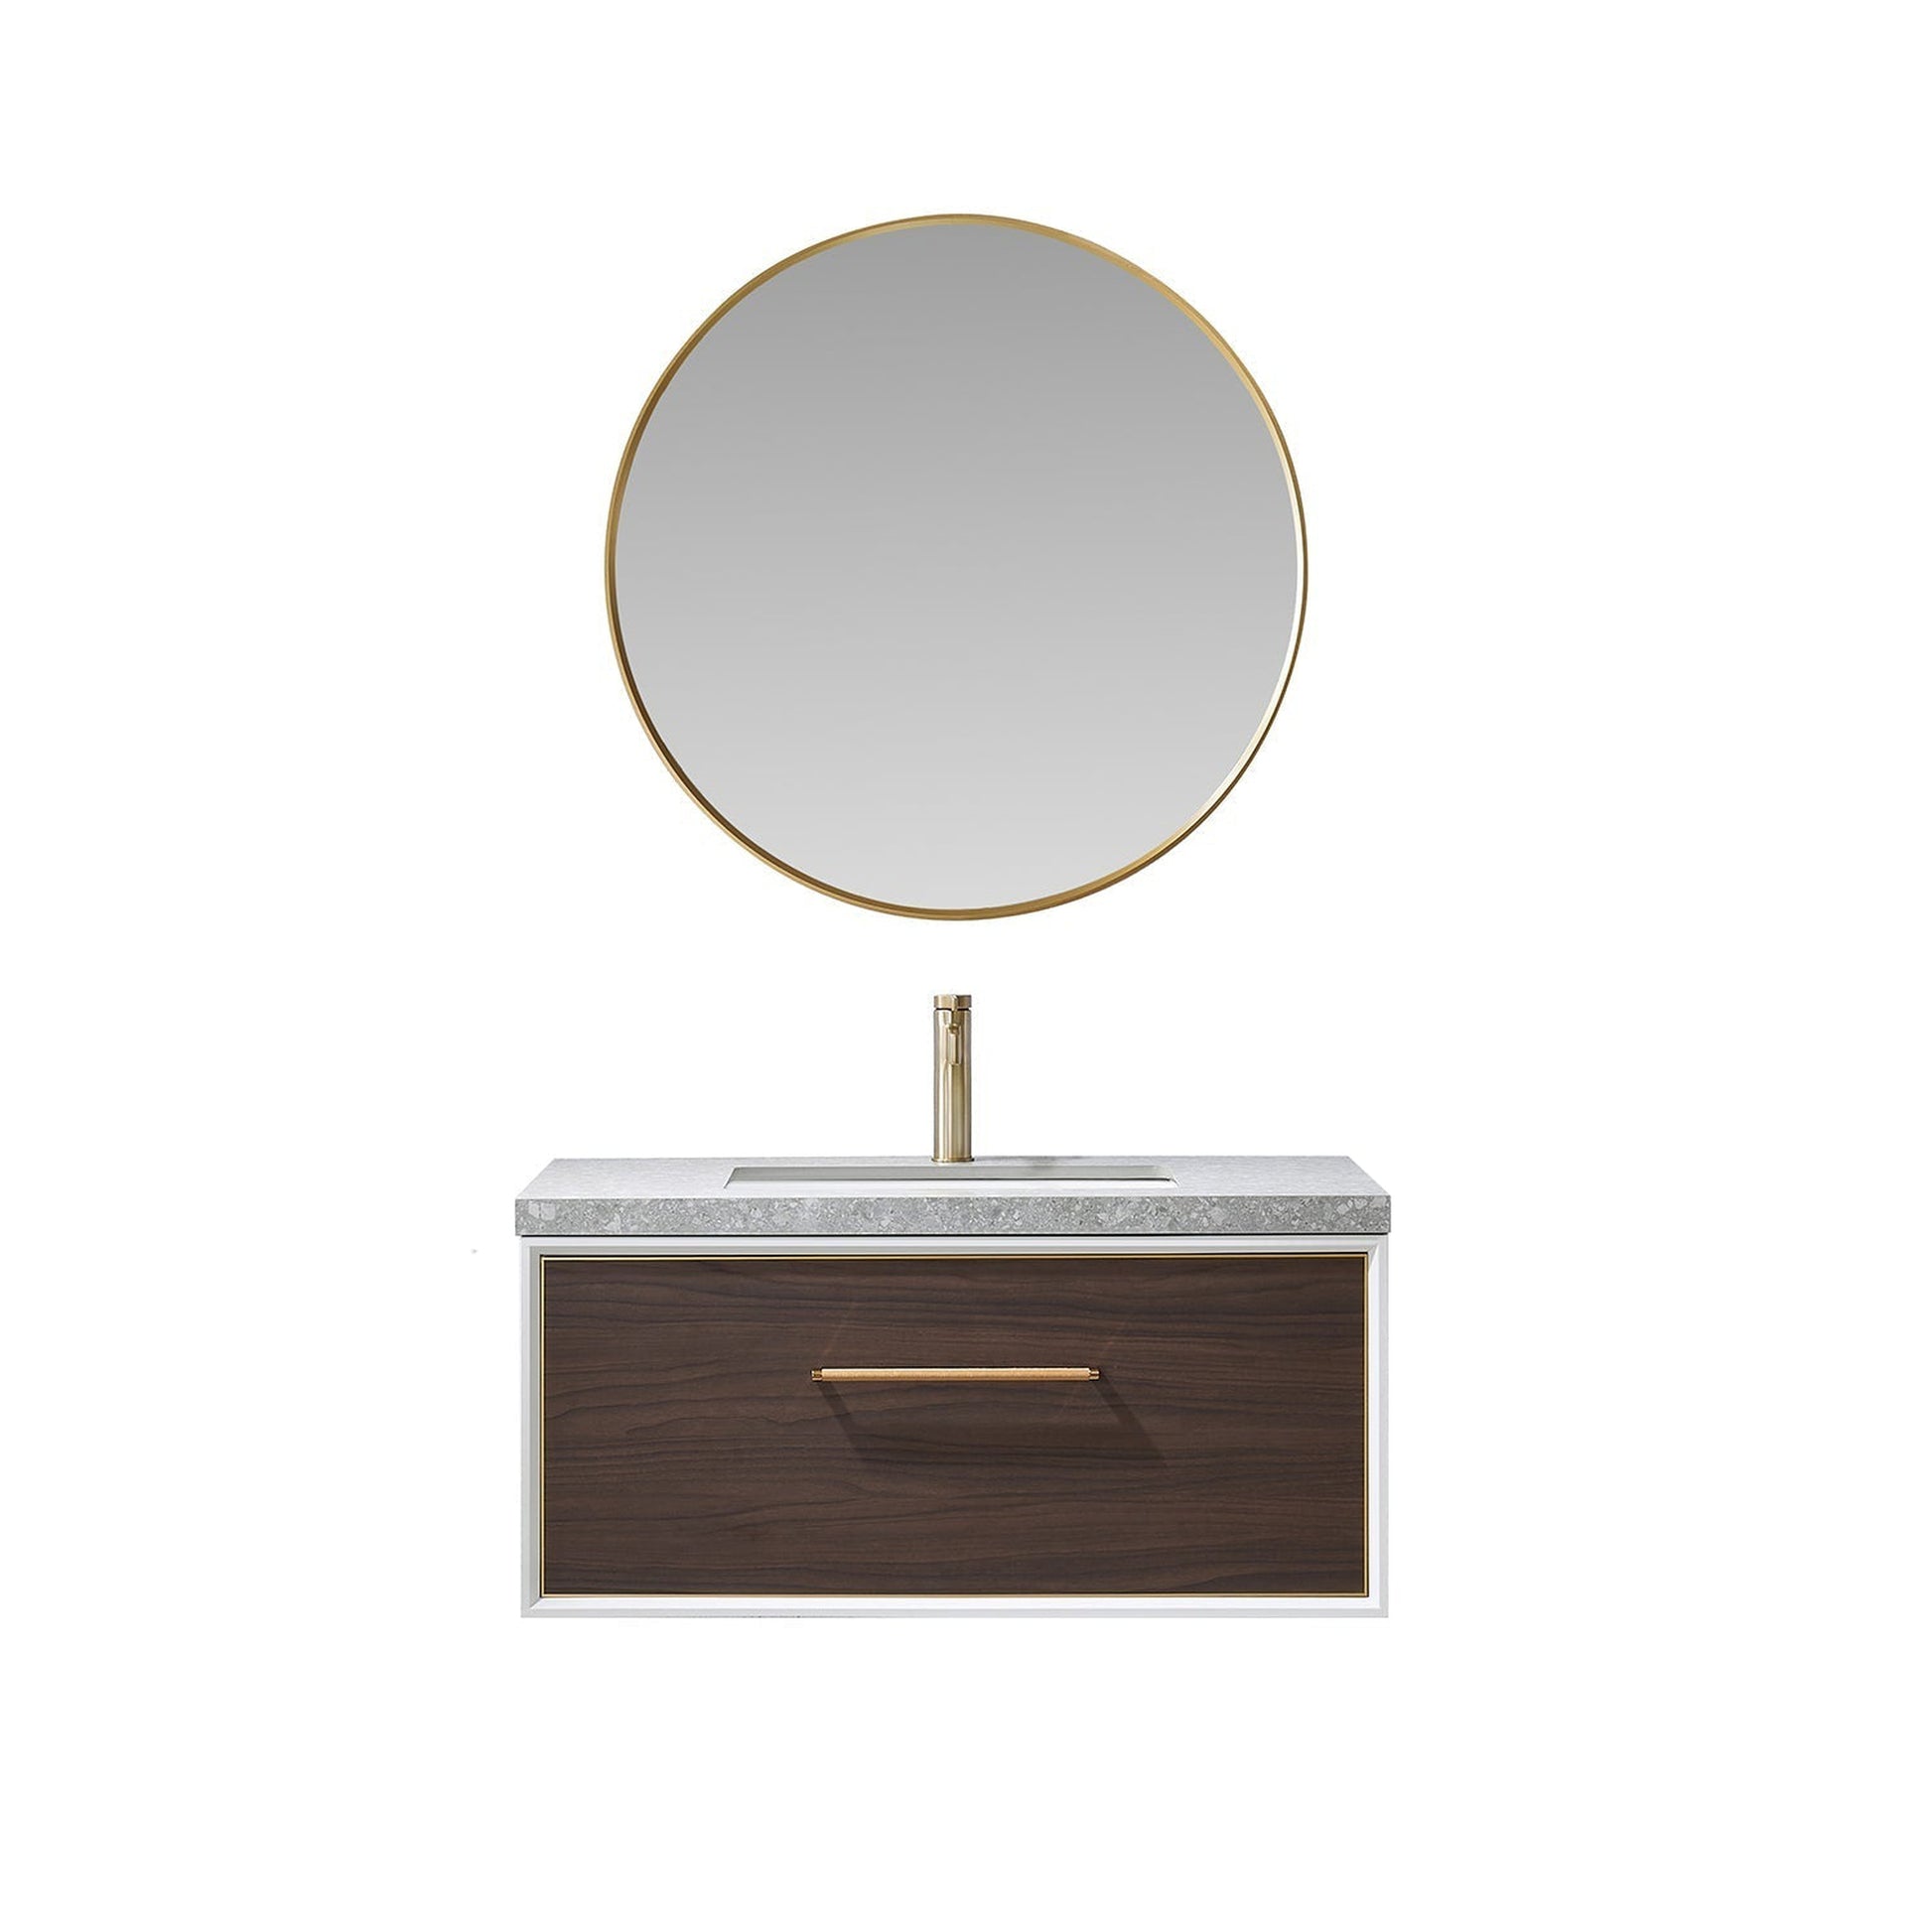 Vinnova Caparroso 36" Single Sink Floating Bathroom Vanity In Dark Walnut And Brushed Gold Hardware Finish With Grey Sintered Stone Top And Mirror